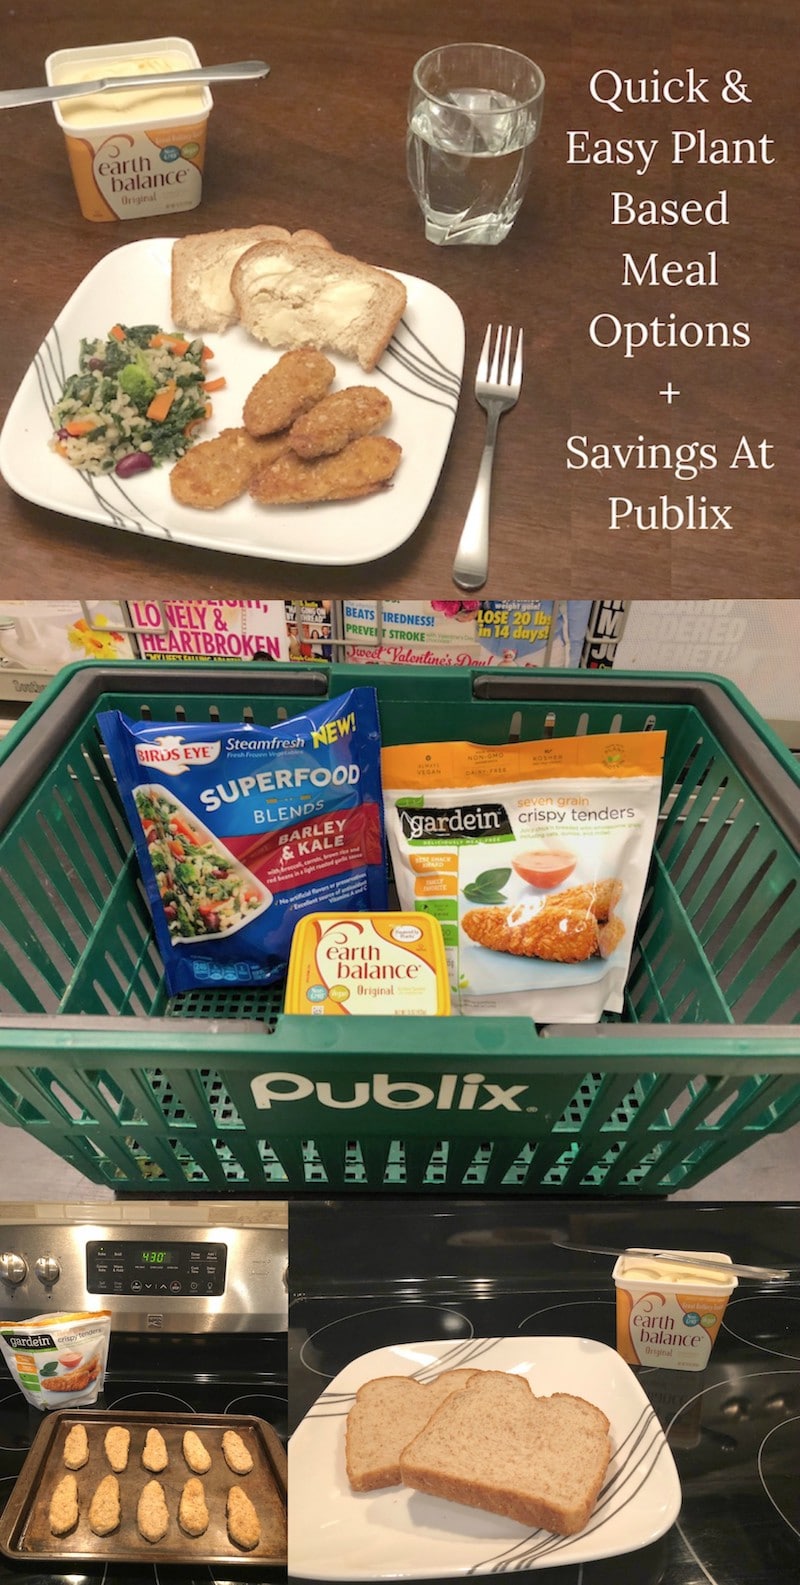 Quick & Easy Plant Based Meal Options + Savings At Publix You will love this meal because it's fast, delicious, and on sale! You can choose plant-based foods without giving up taste, convenience, or quality.